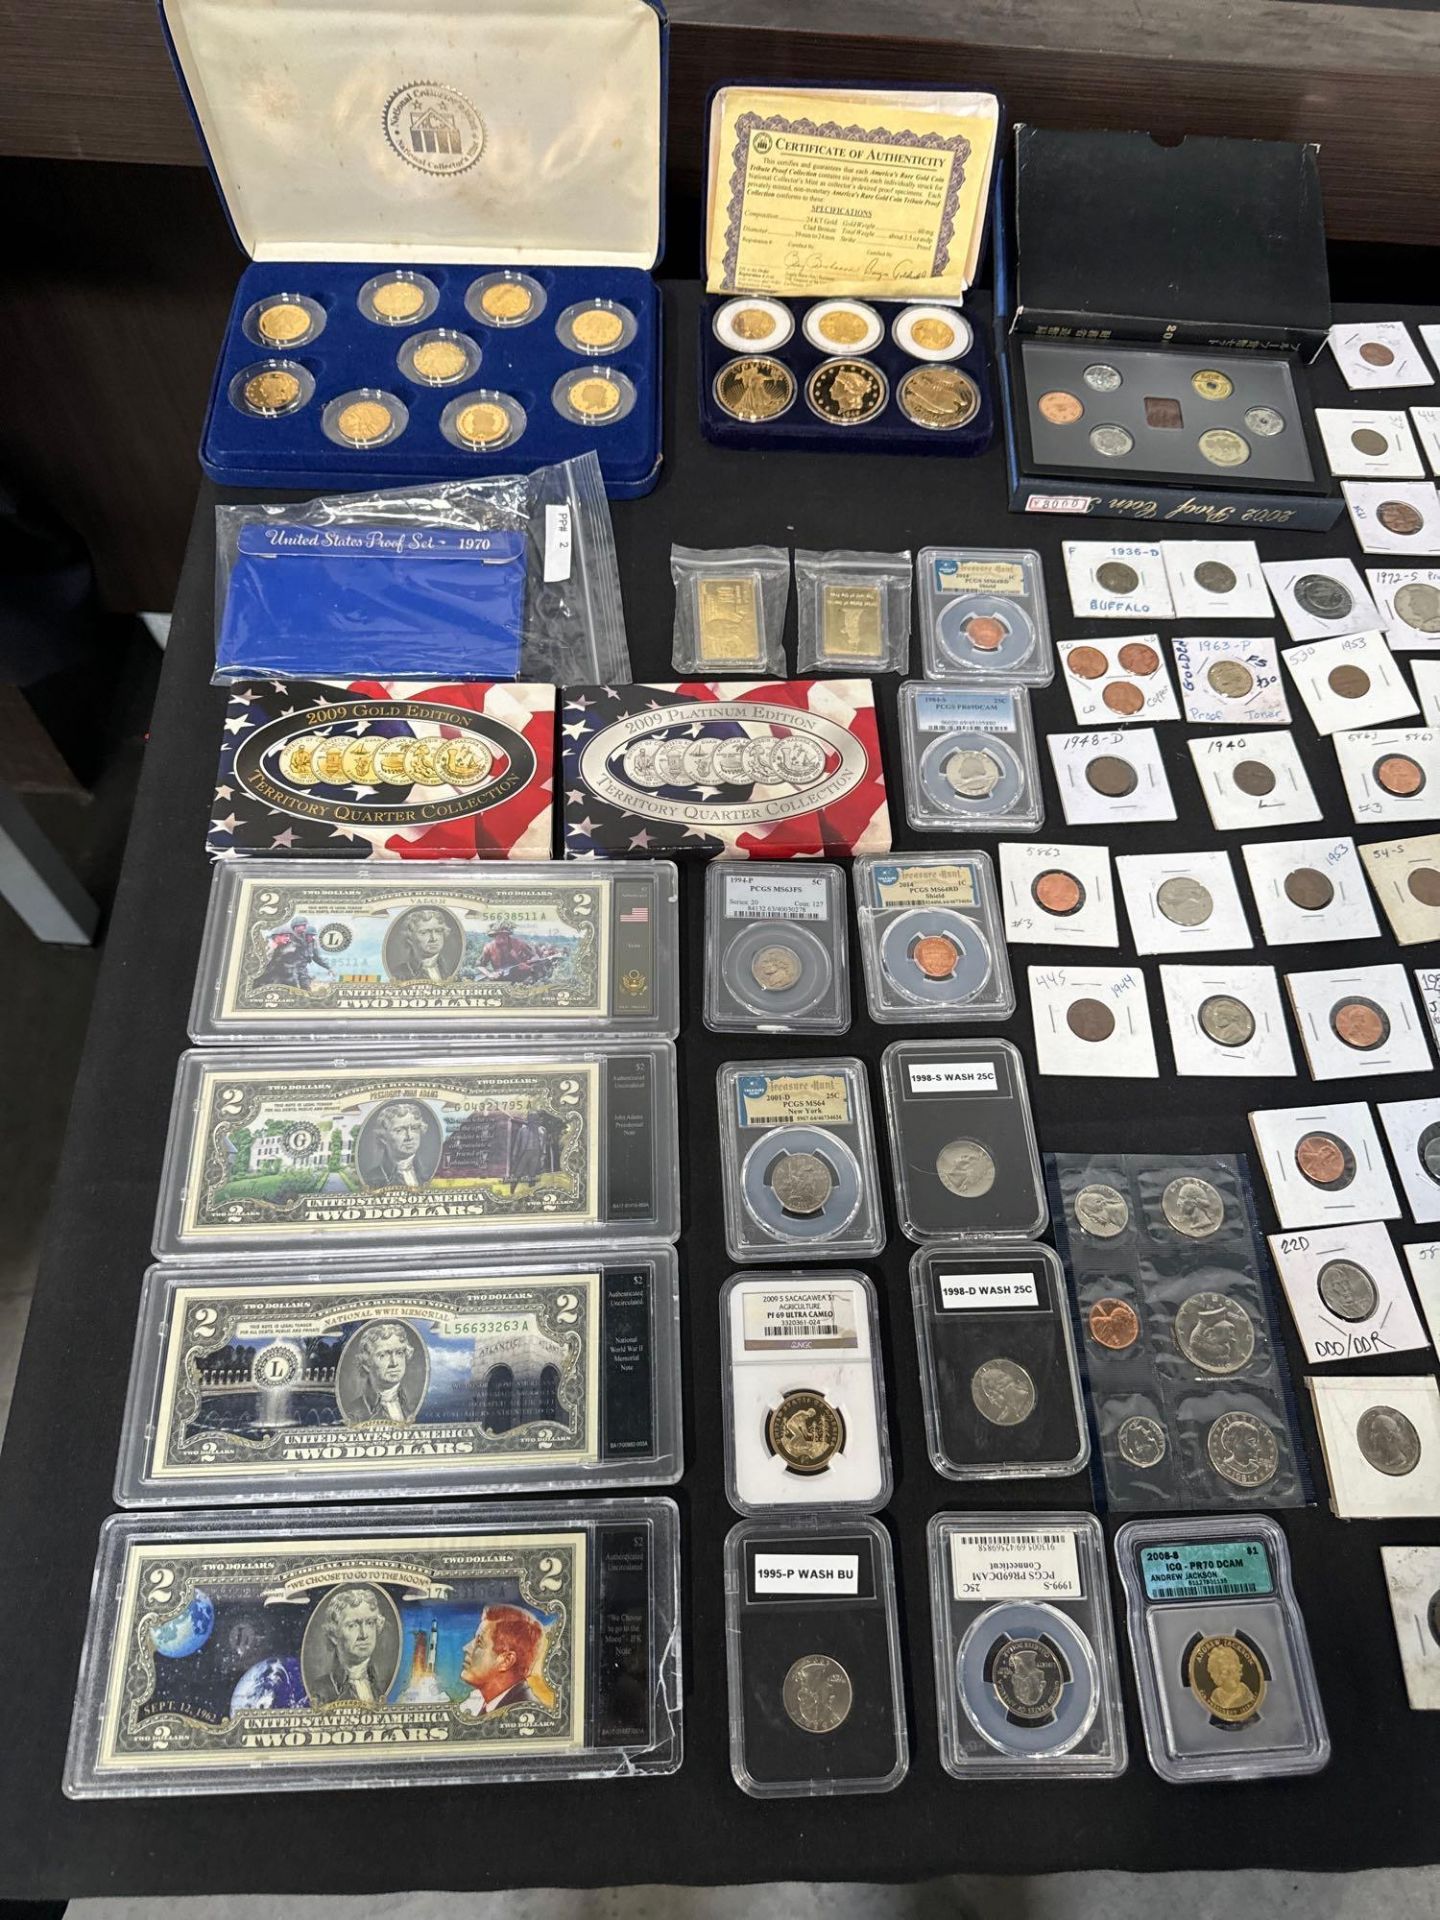 Coin & Currency Lot, Coins in protetors, gold stamps, Quarters, Currecncy, Proof Set, Tribute Proof - Image 2 of 7